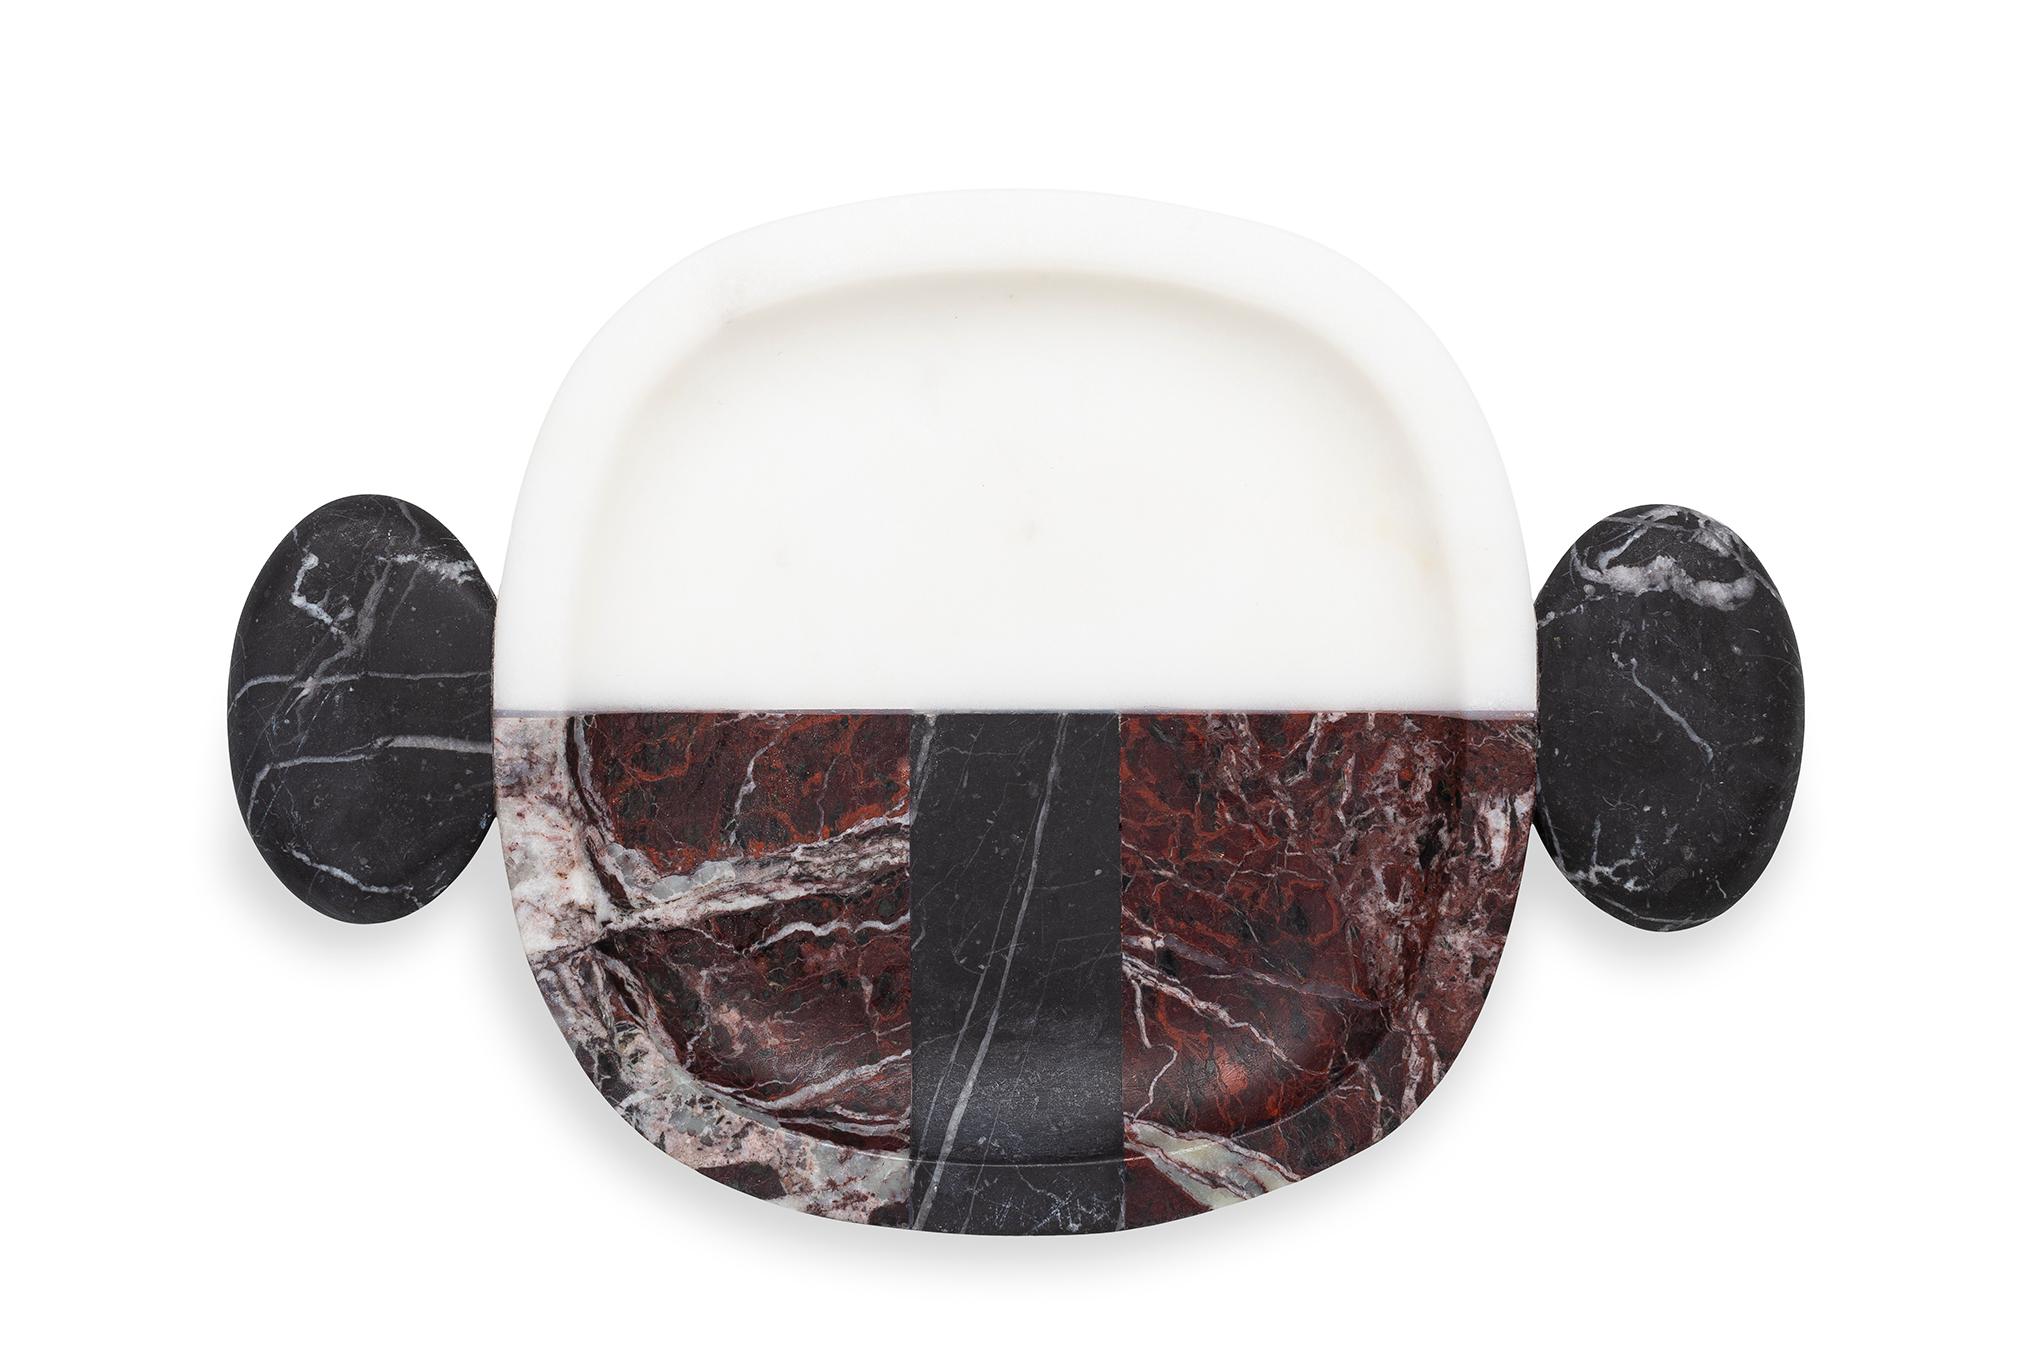 Carlo small plate by Matteo Cibic
Dimensions: 22.5 x 15 x 2 cm
Materials: Nero Marquinia, Bianco Michelangelo, Rosso Levanto

Please note that the Cibic pieces with “ears” or tray handles are ornamental and not functional. 
Use them can cause breaks